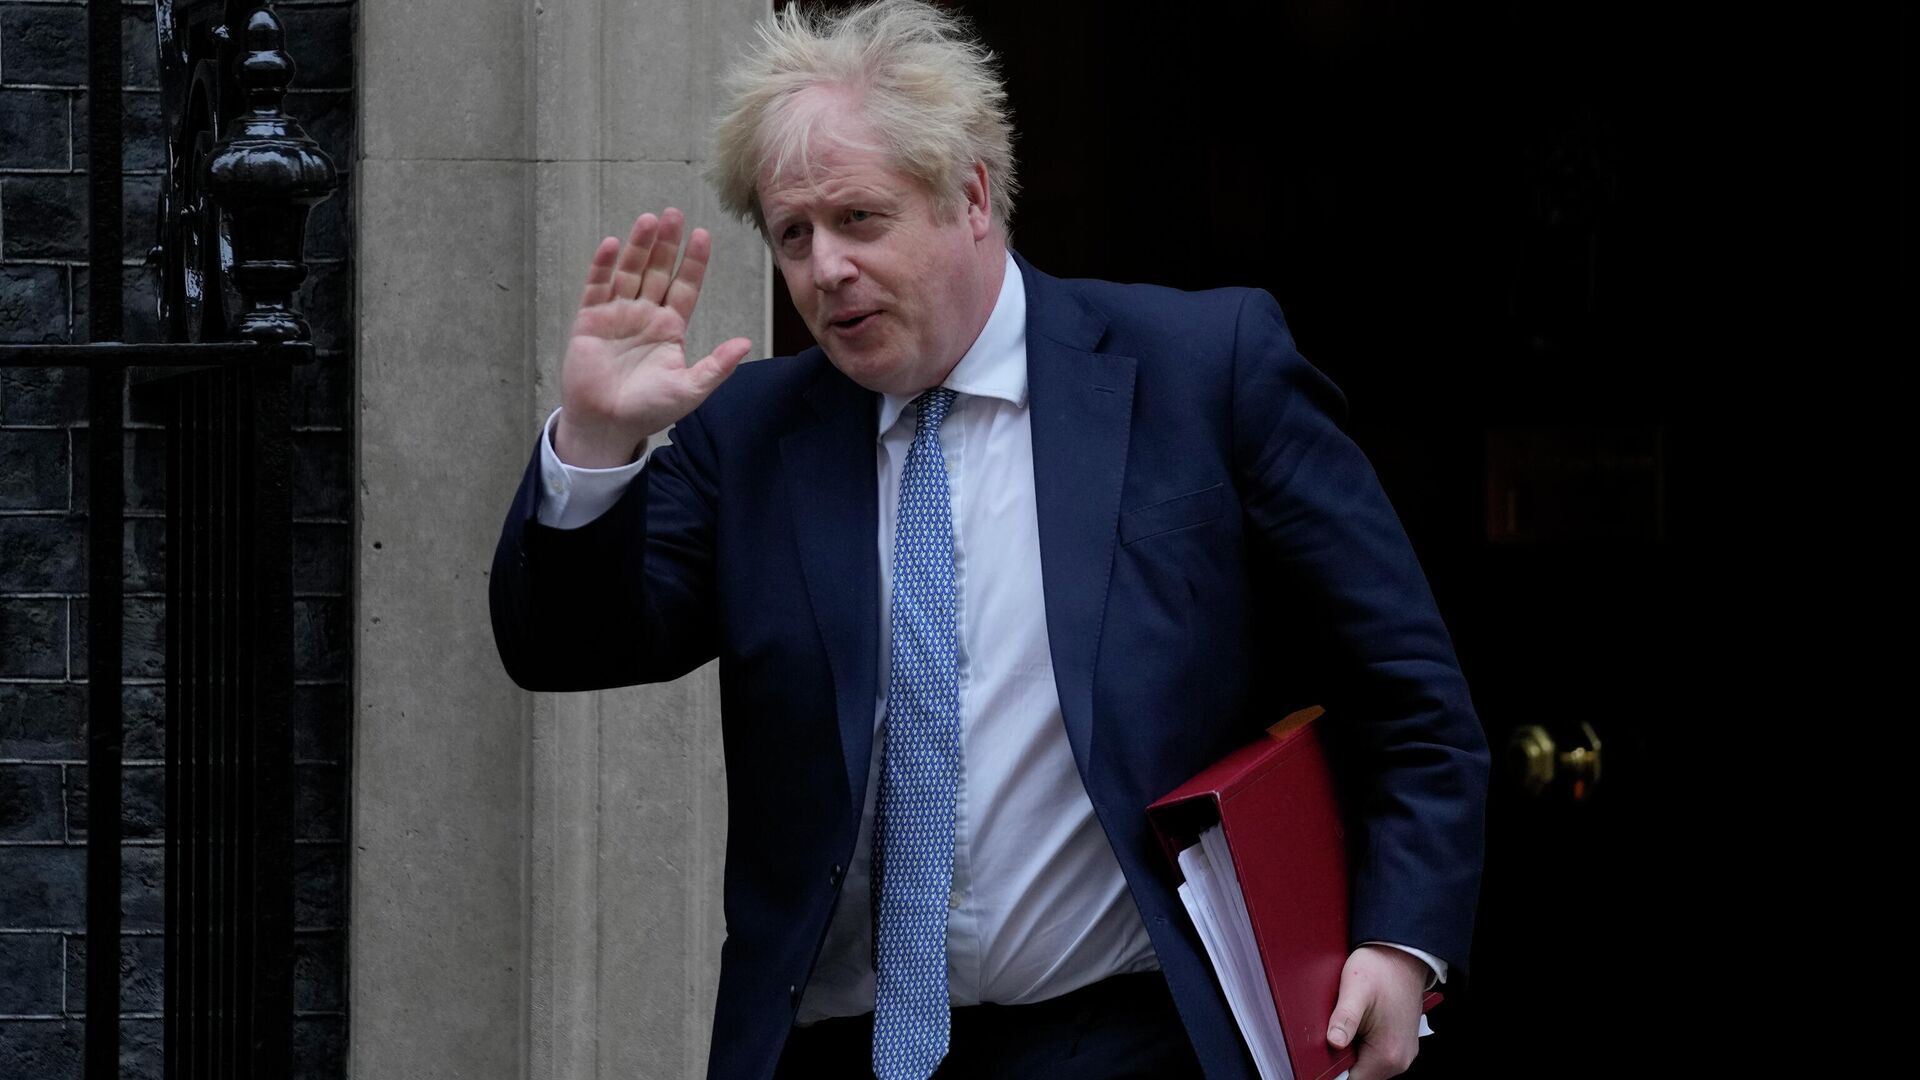 Britain's Prime Minister Boris Johnson leaves 10 Downing Street for the House of Commons for his weekly Prime Minister's Questions in London, Wednesday, Feb. 2, 2022. - Sputnik International, 1920, 06.02.2022